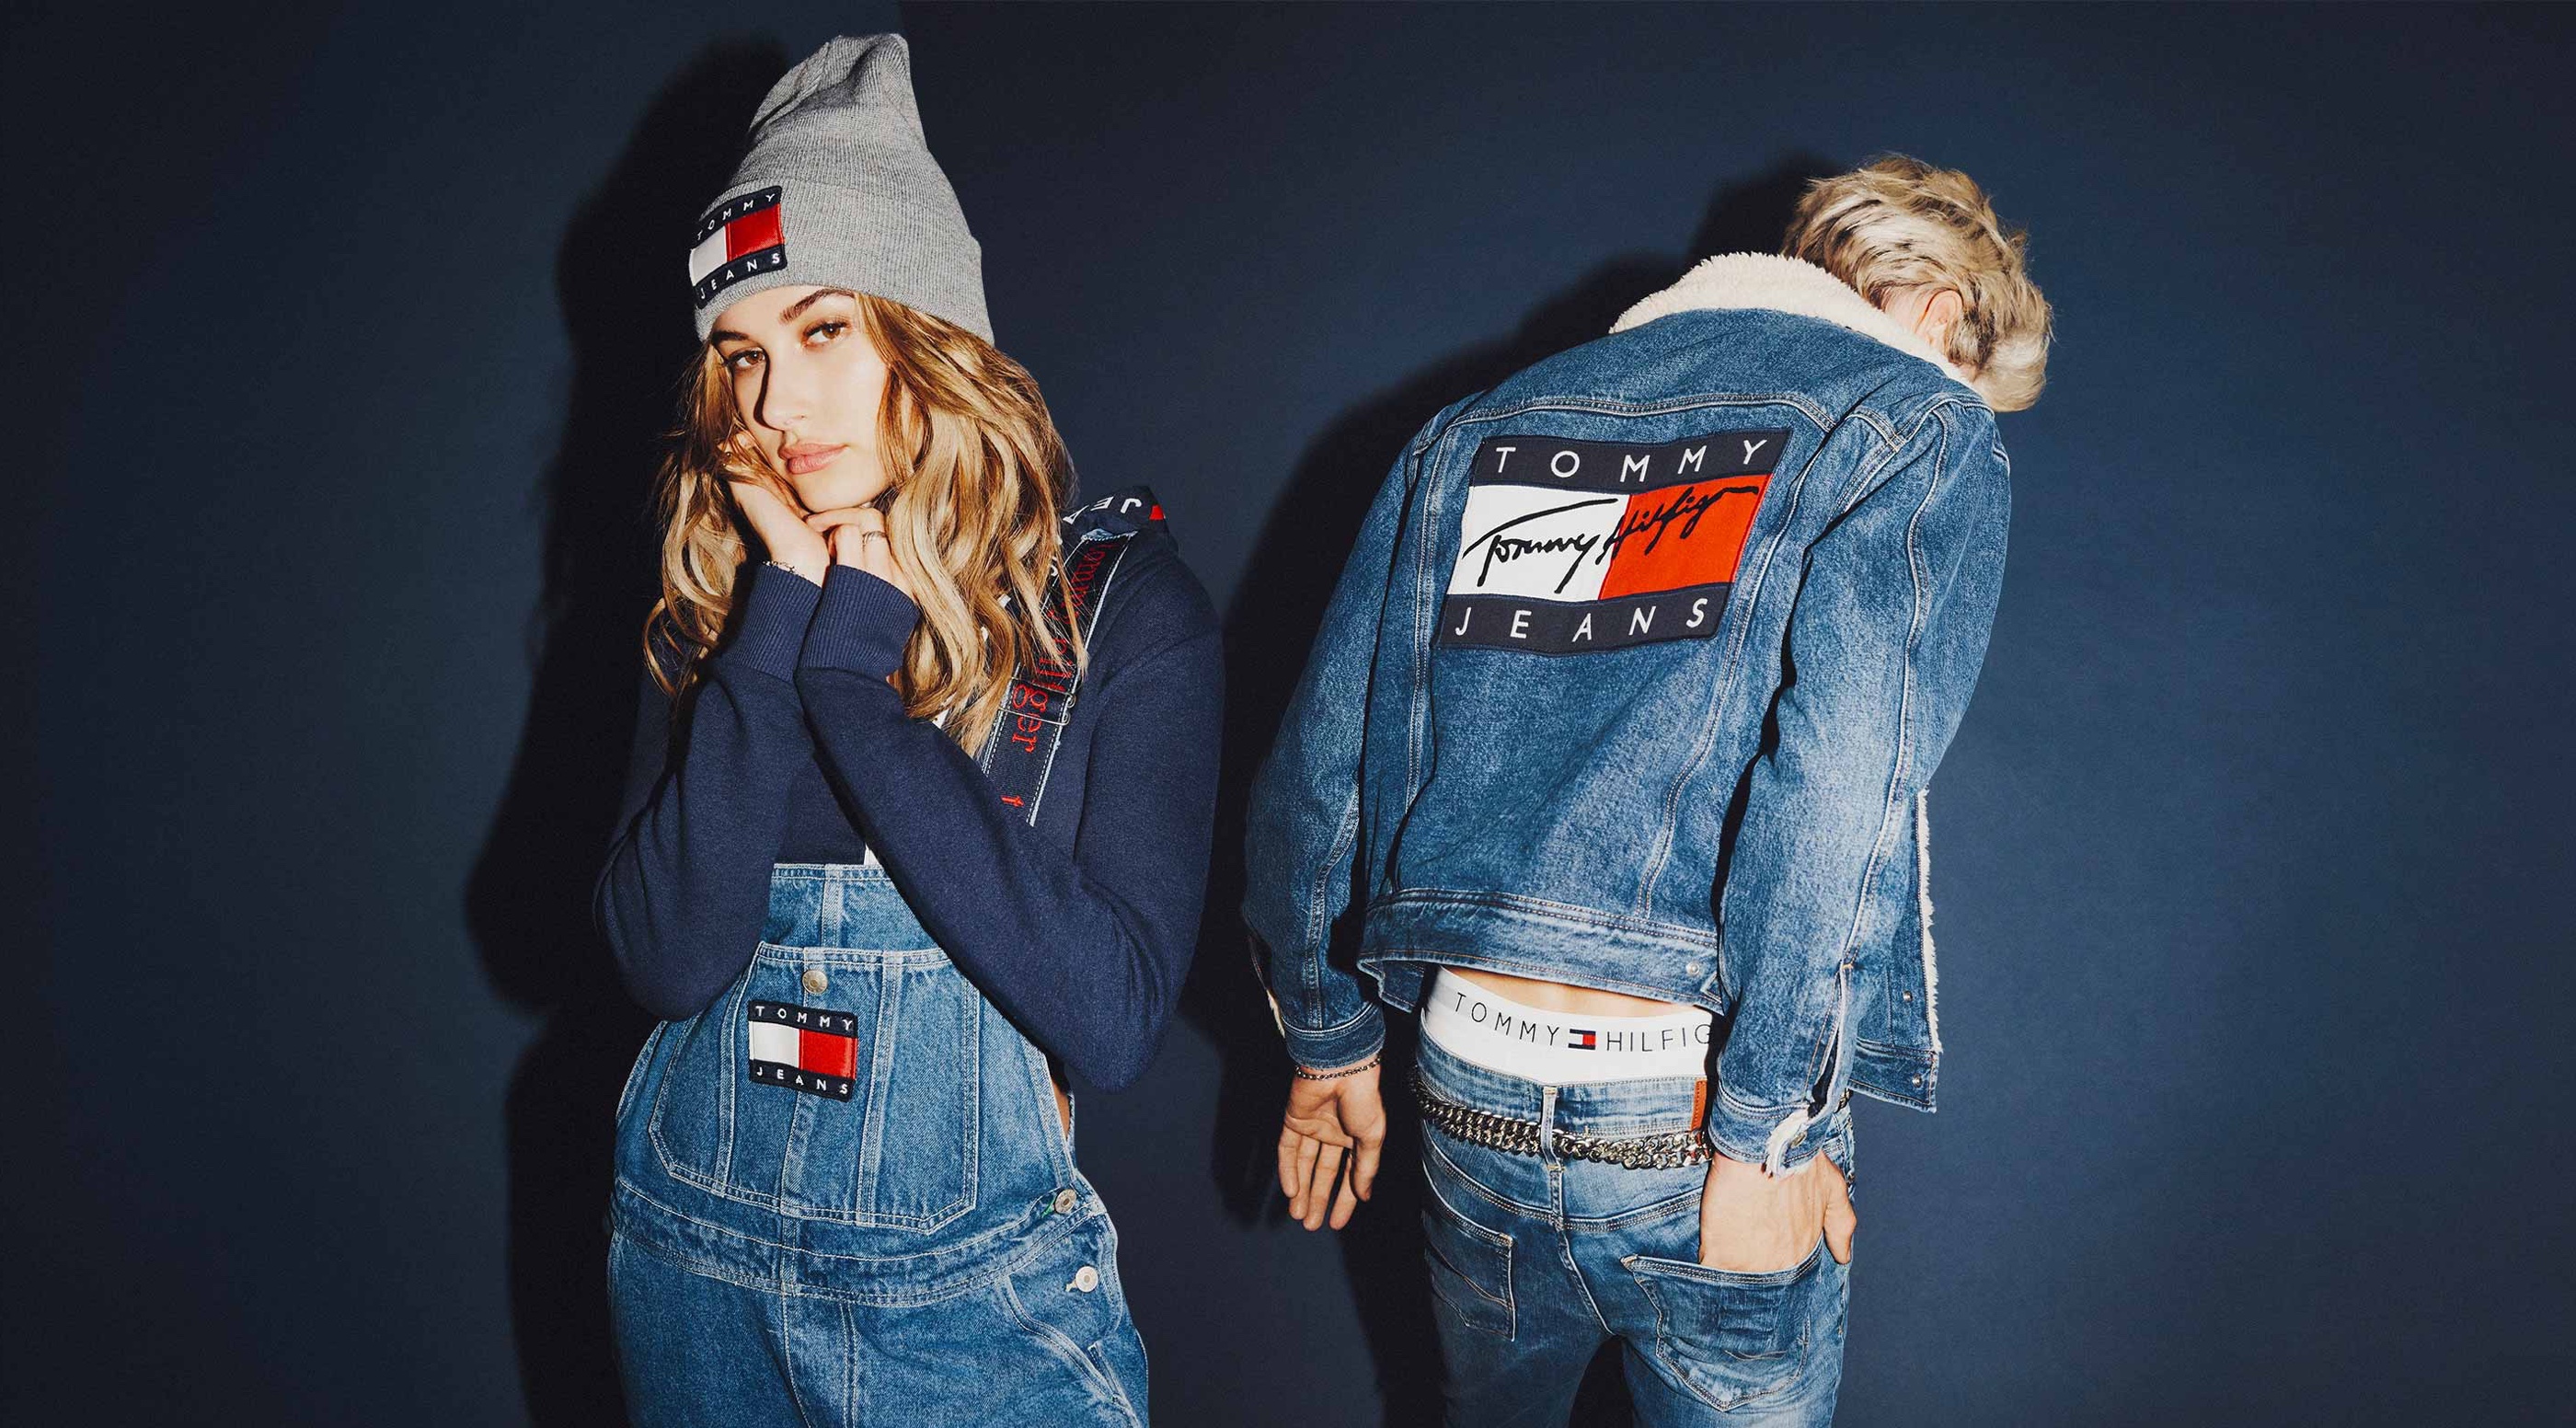 tommy jeans is tommy hilfiger